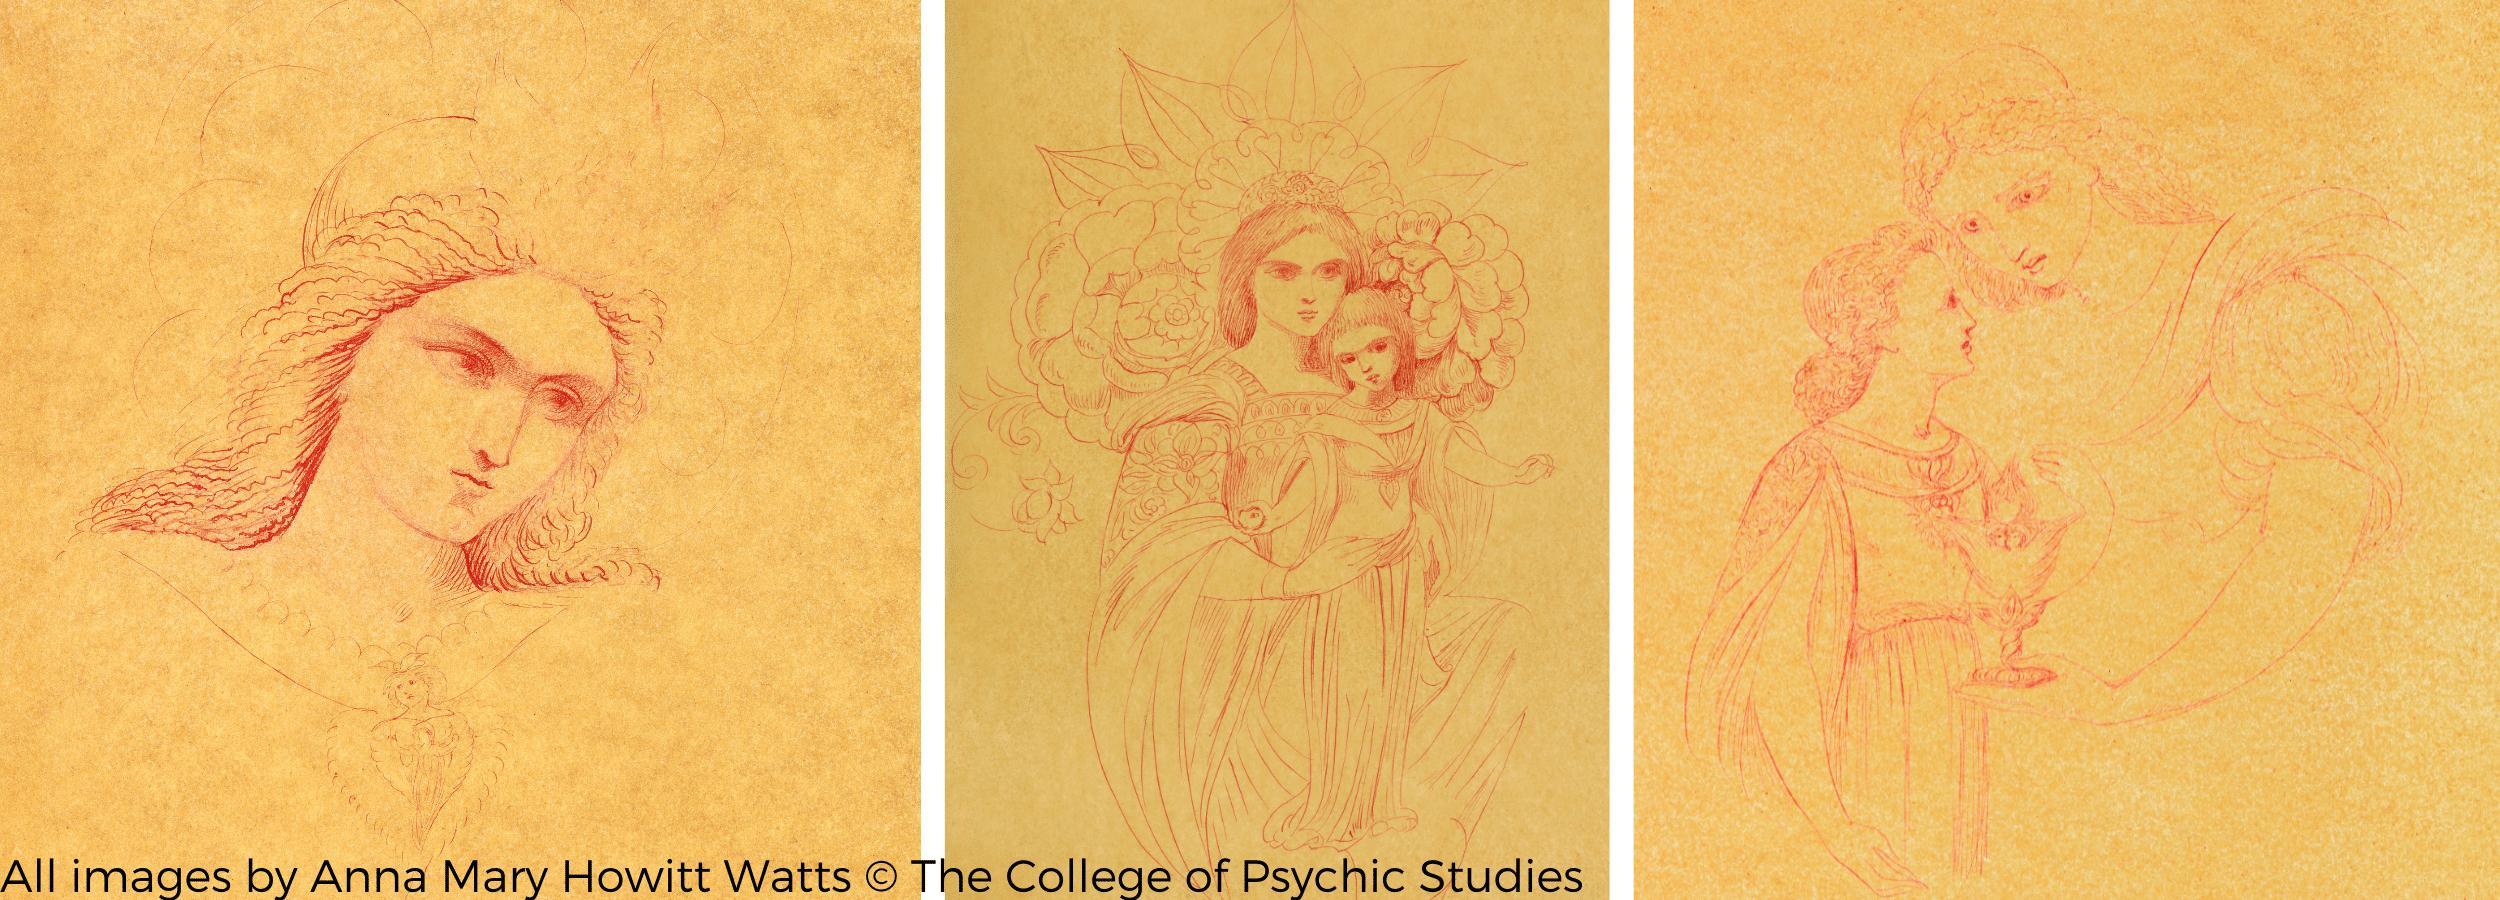 Three line drawings by Anna Mary Howitt, from The College of Psychic Studies collection